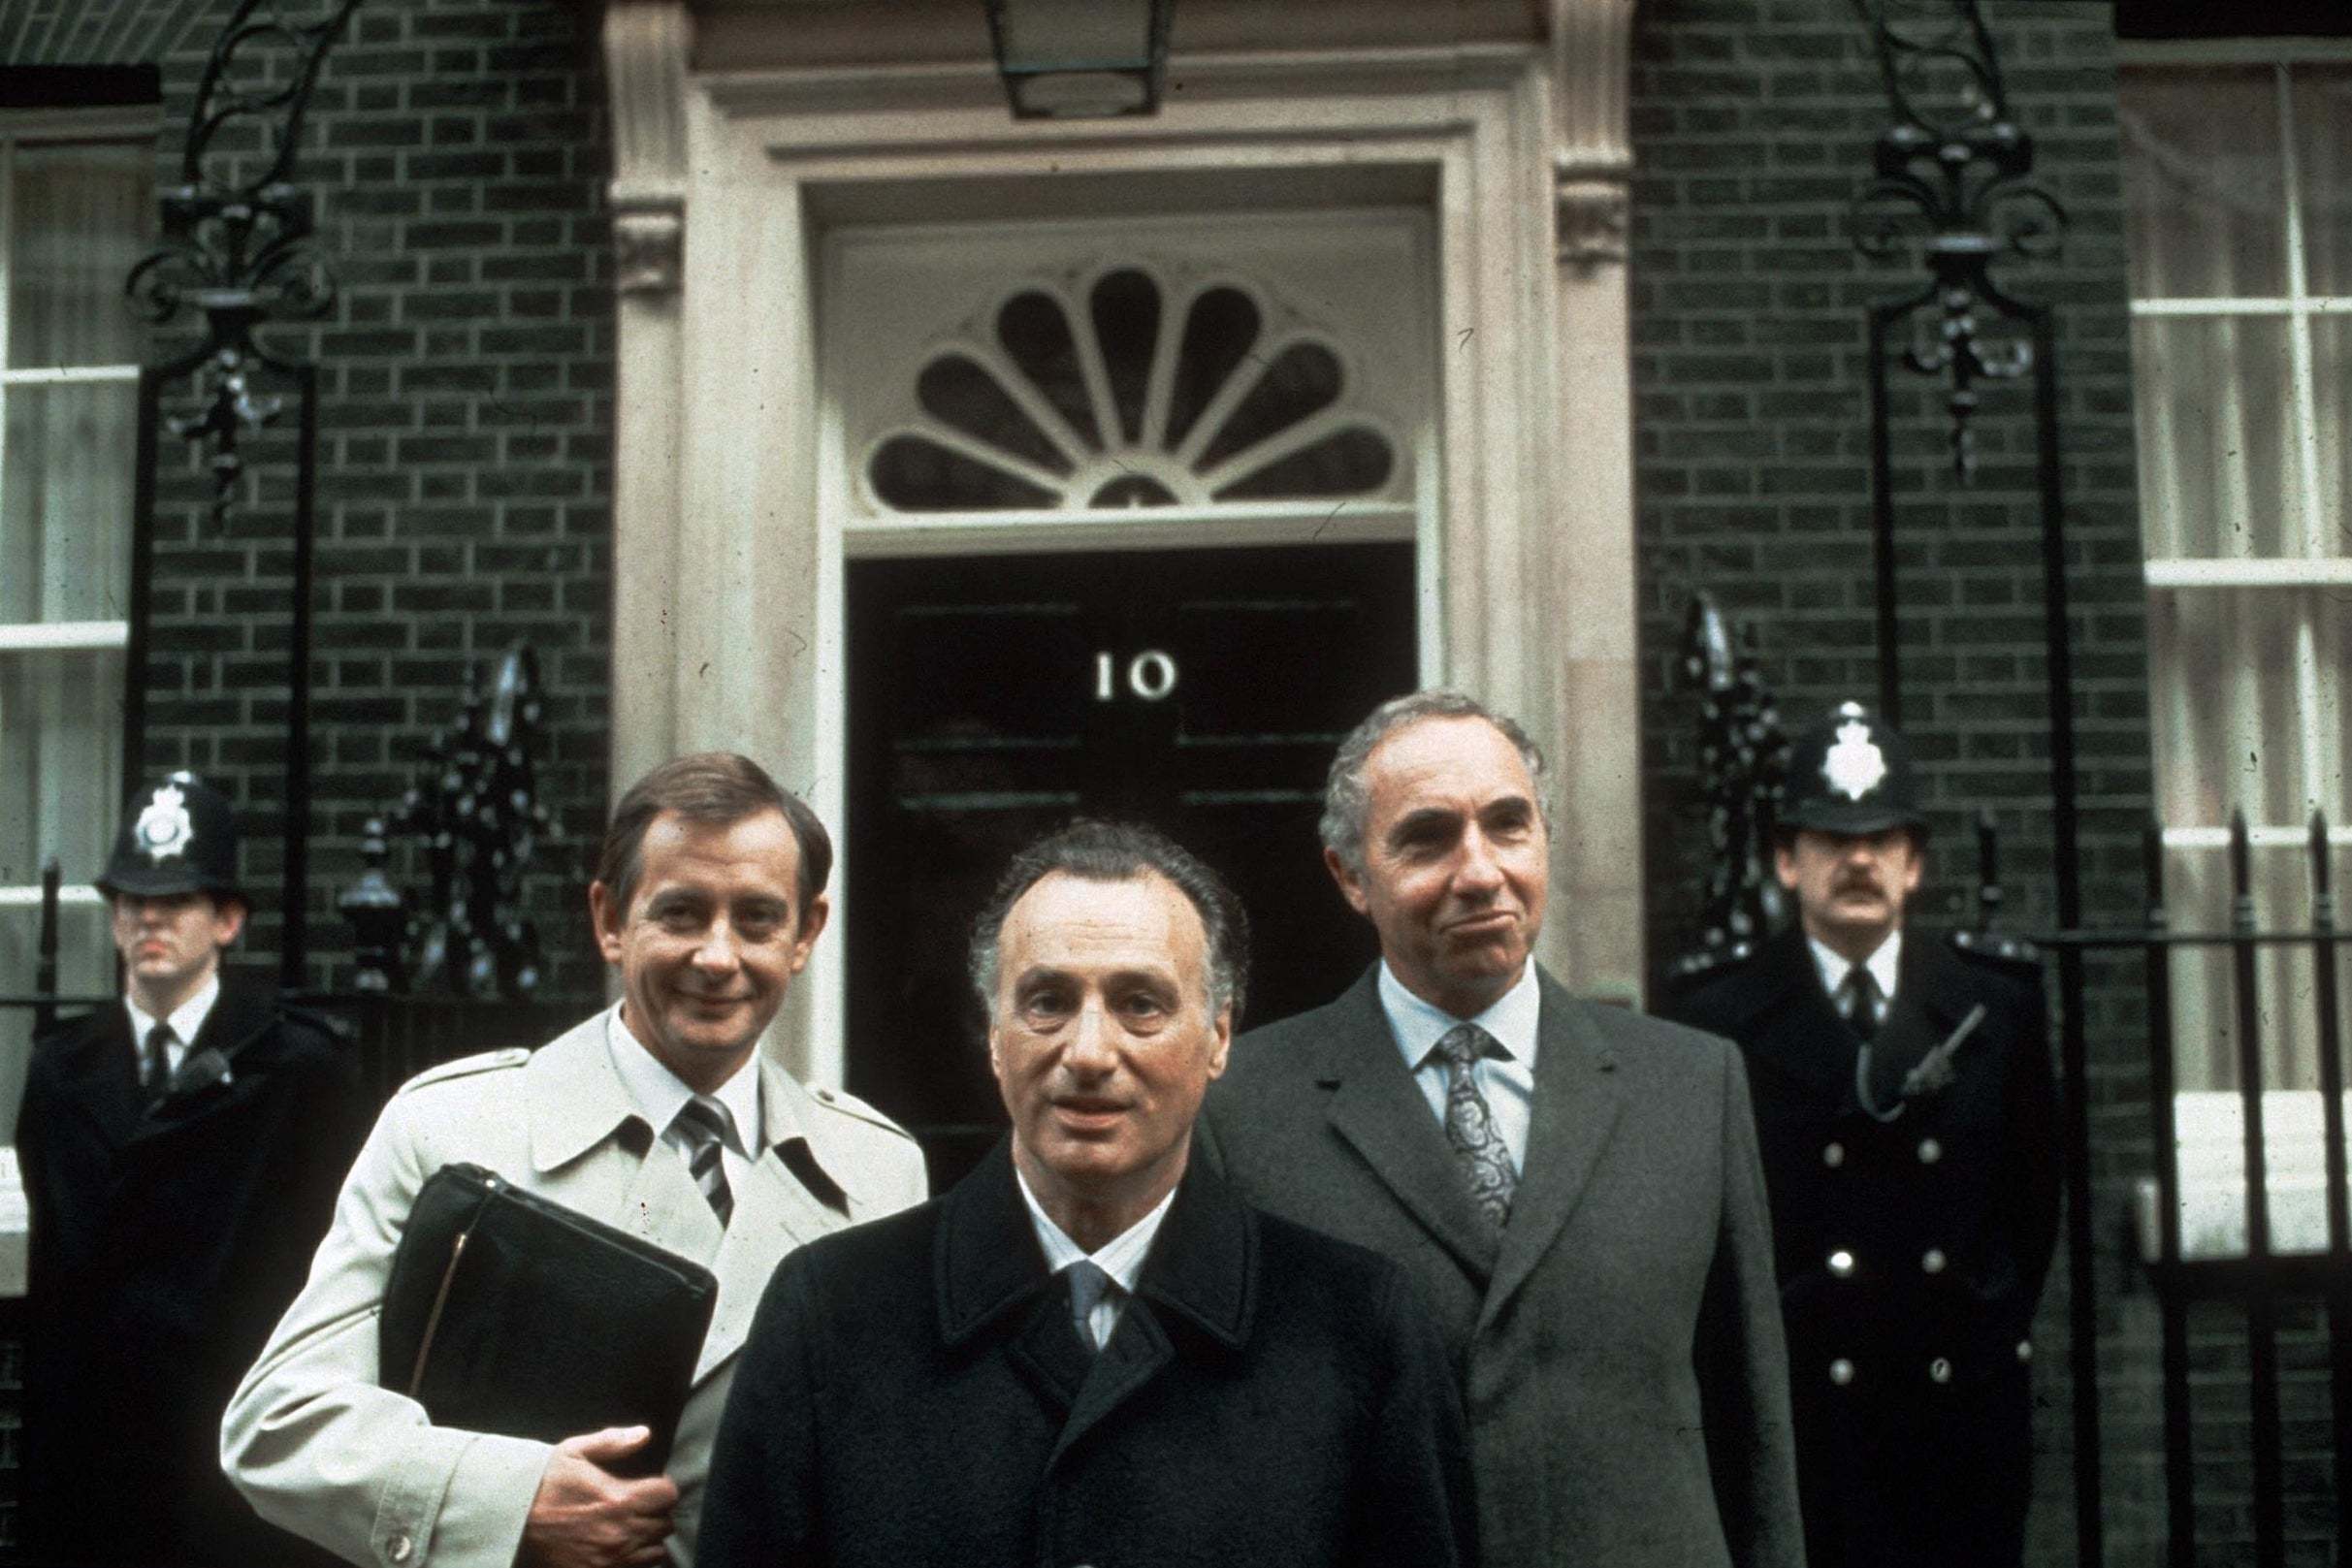 What would Jim Hacker and his ingenious permanent secretary, Sir Humphrey Appleby, make of current Big Tech deals?